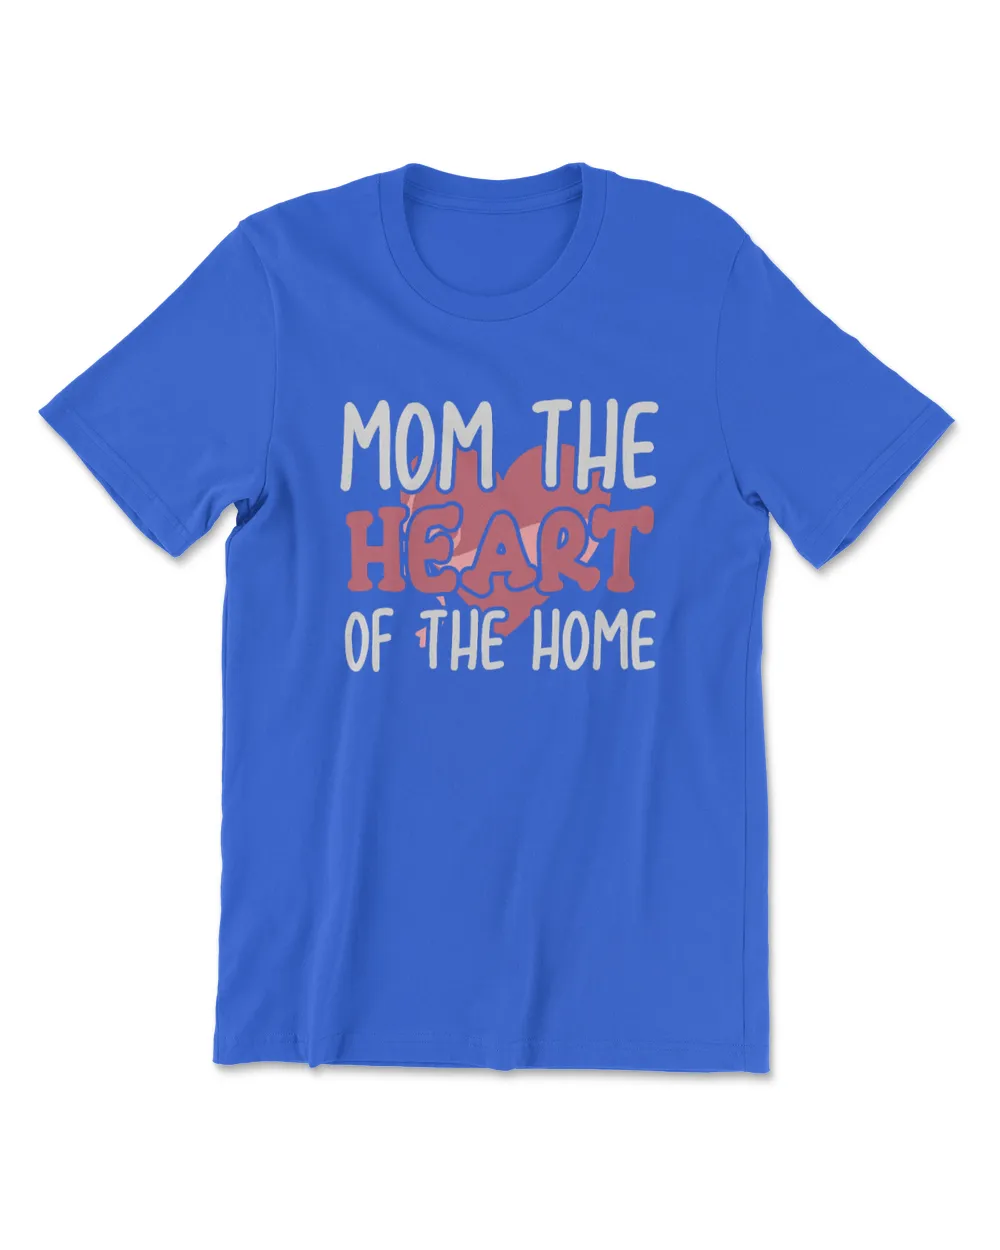 Mom the heart of the home tee t shirt